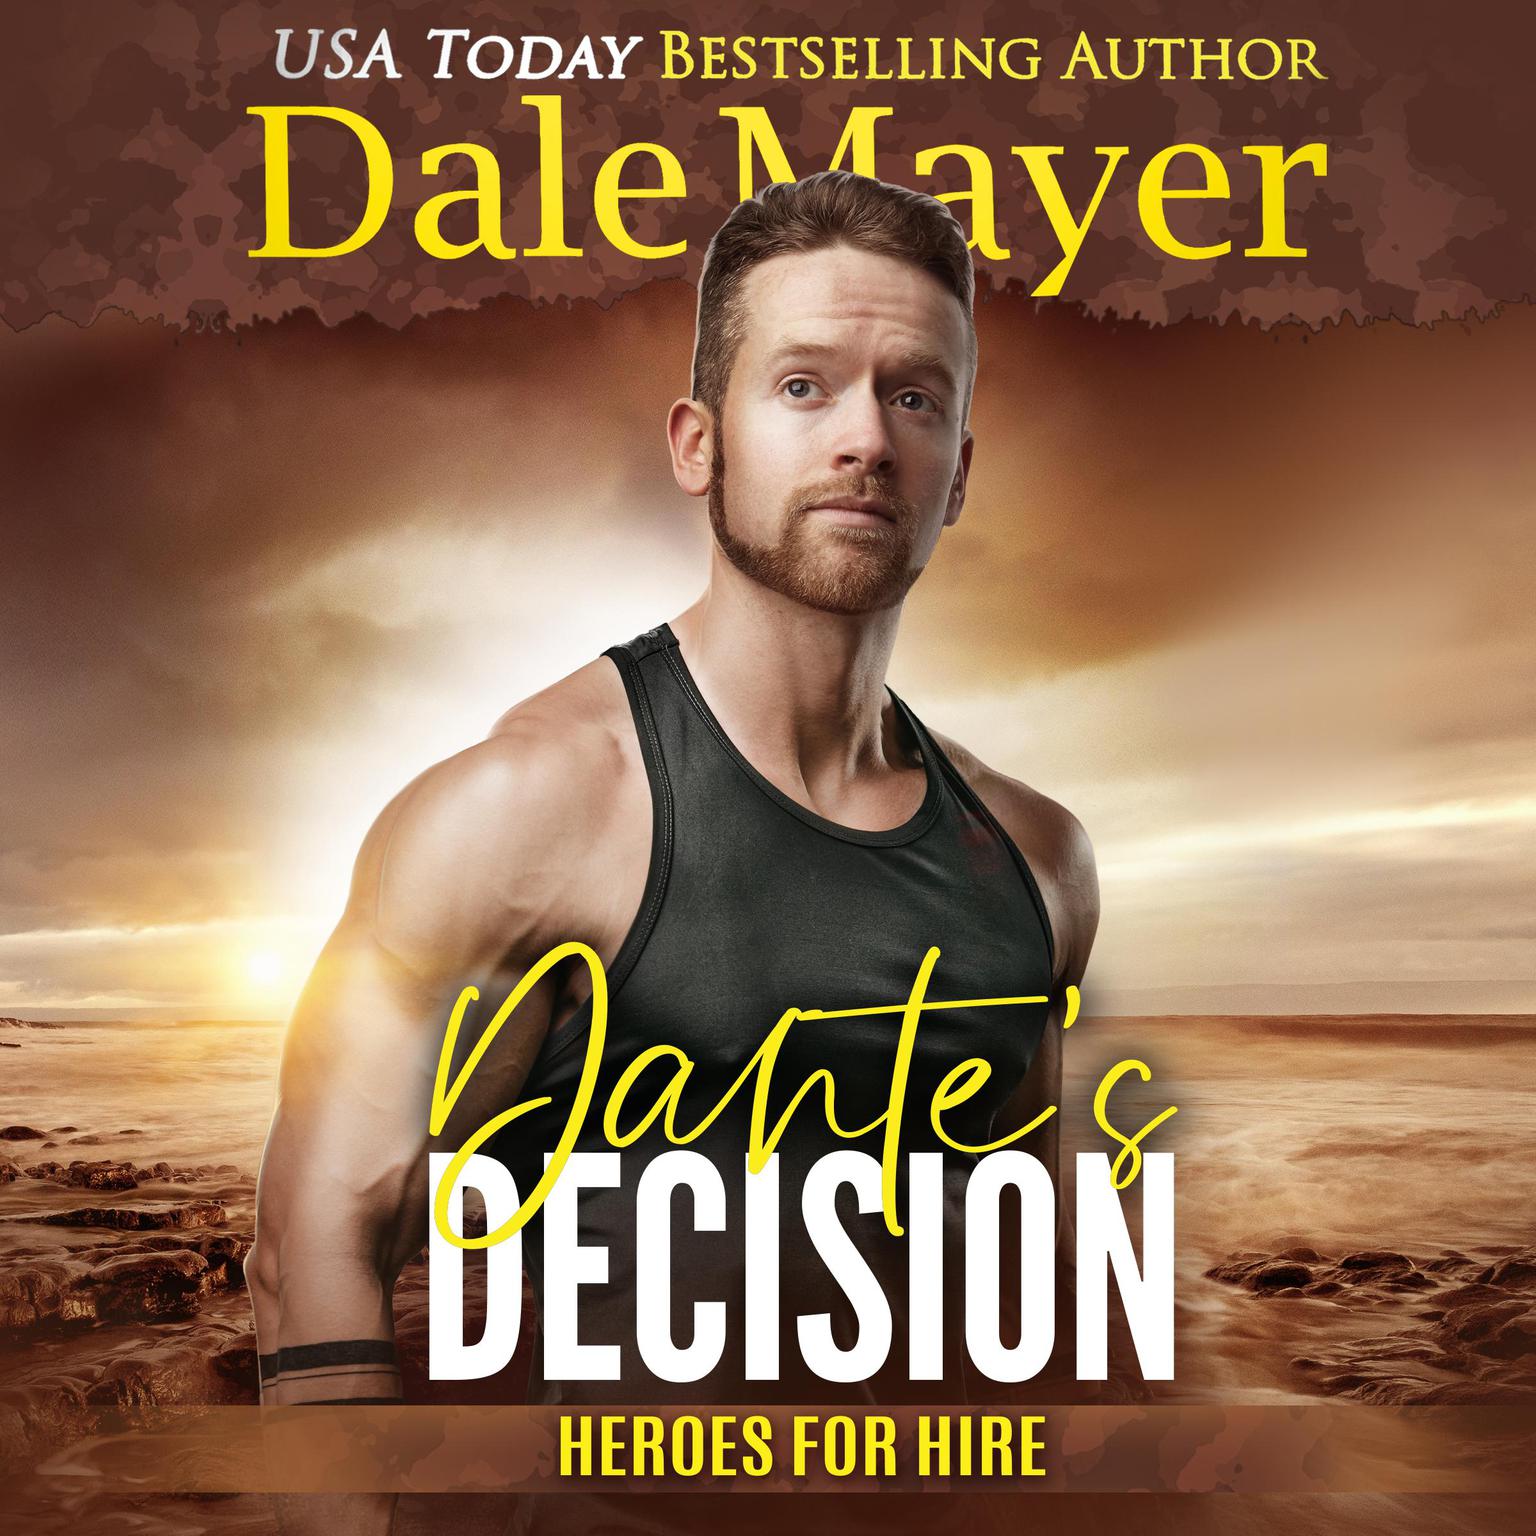 Dantes Decision: A SEALs of Honor World Novel Audiobook, by Dale Mayer